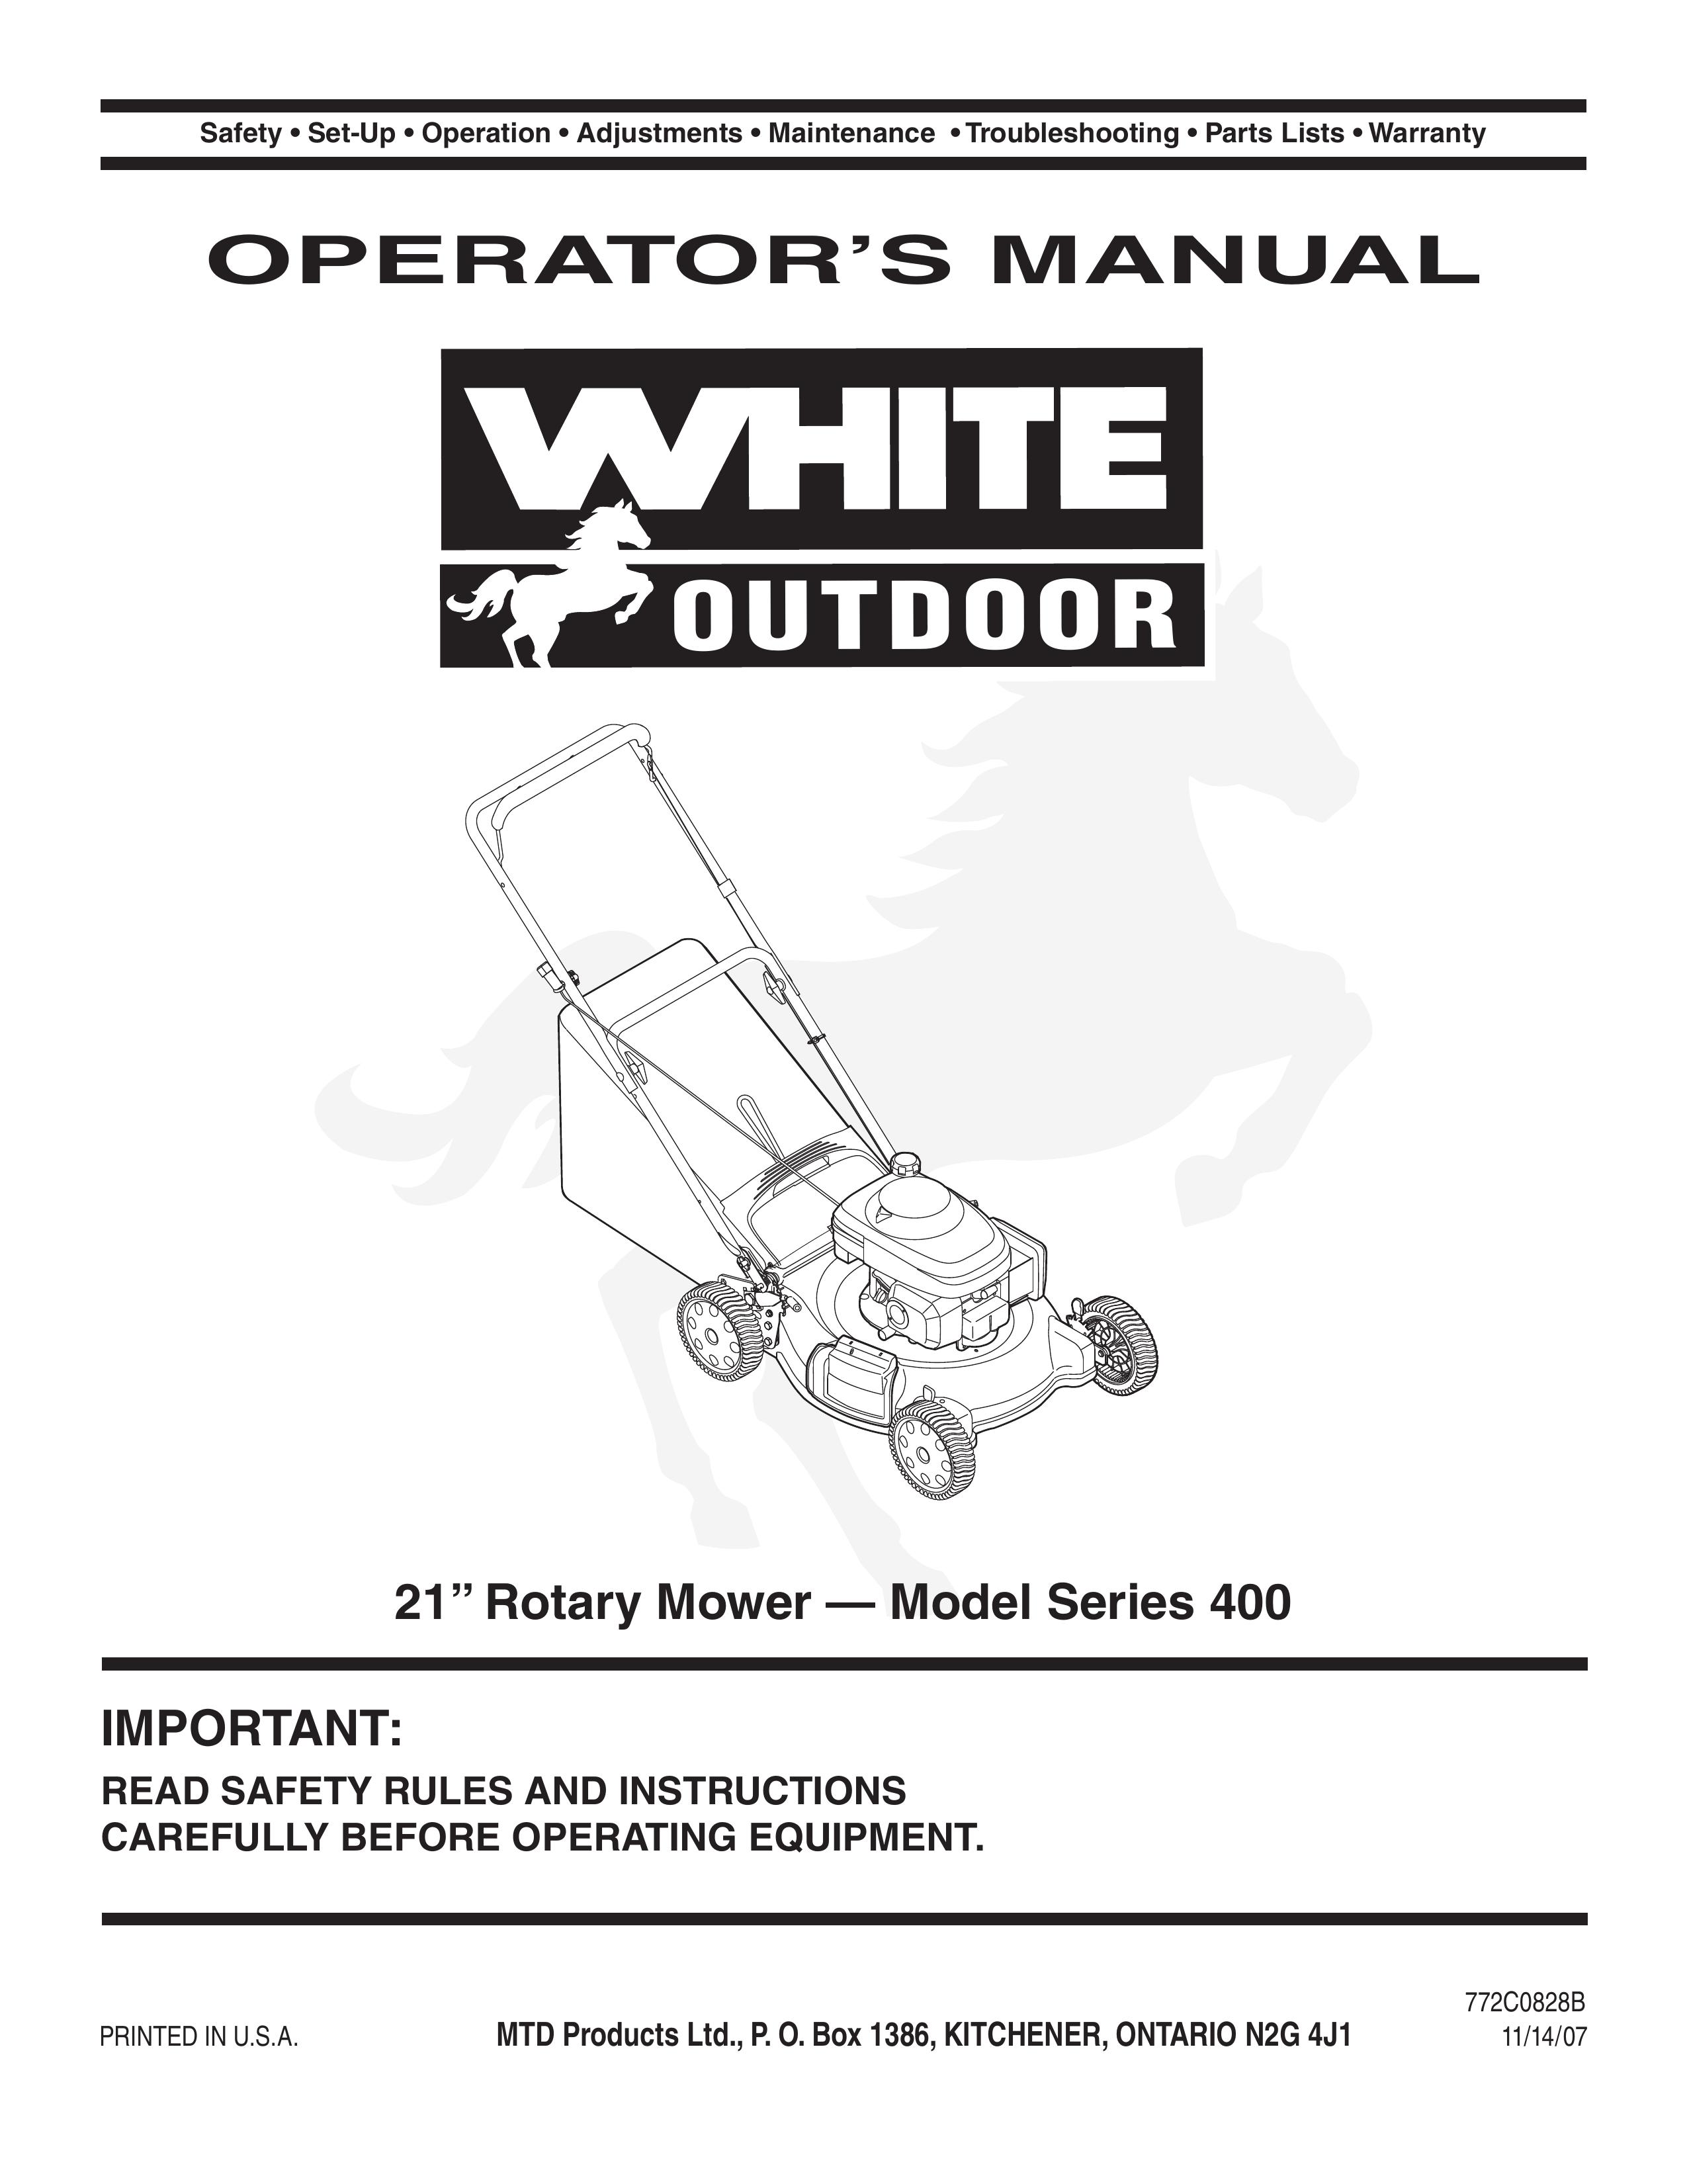 White Outdoor 400 Lawn Mower User Manual